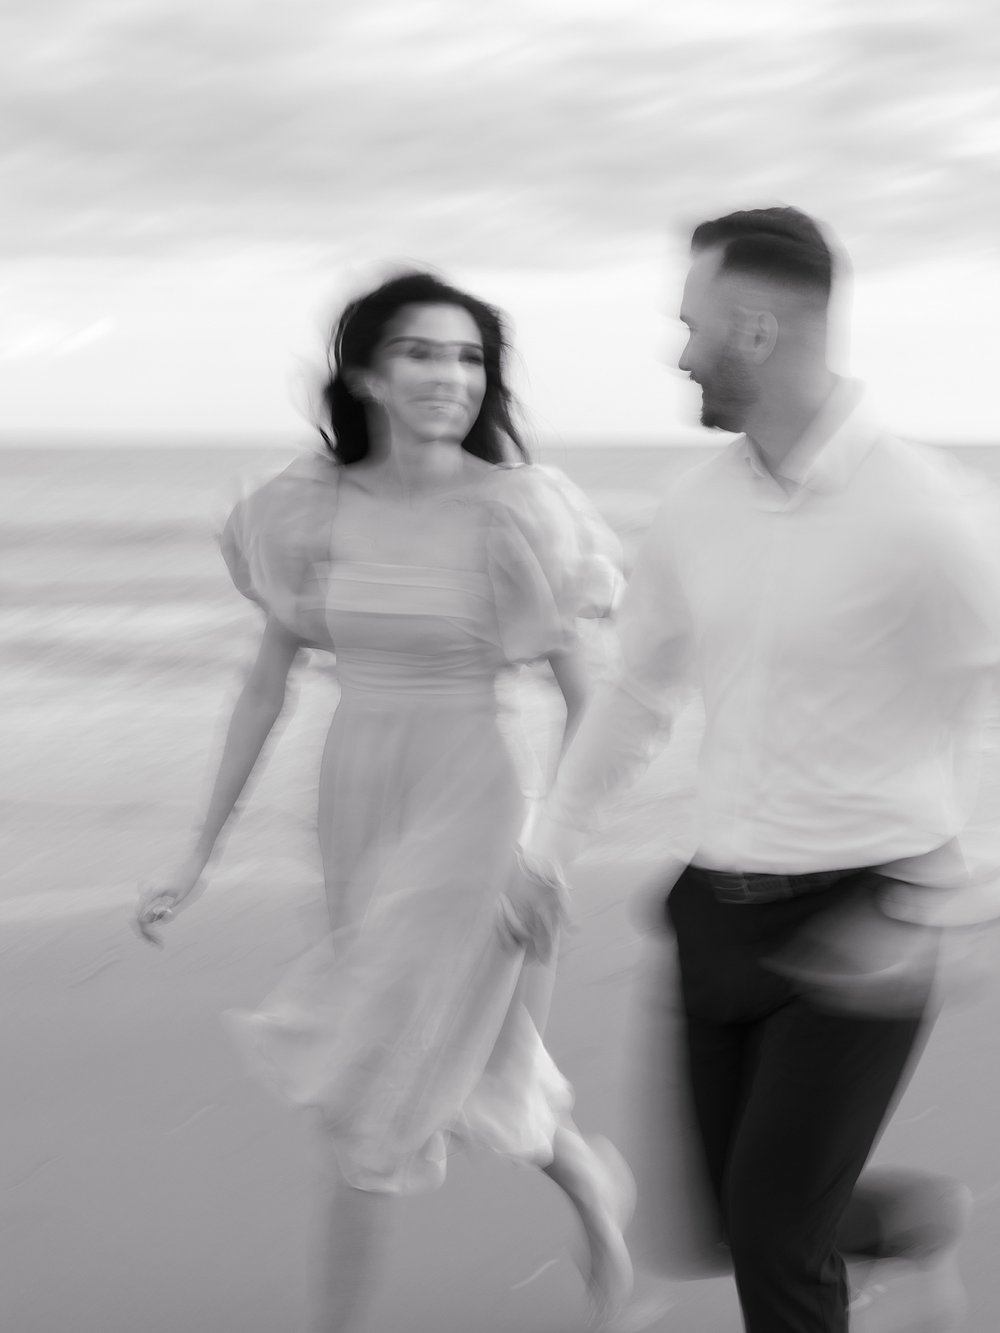 blurry photo of couple running down beach in New Jersey